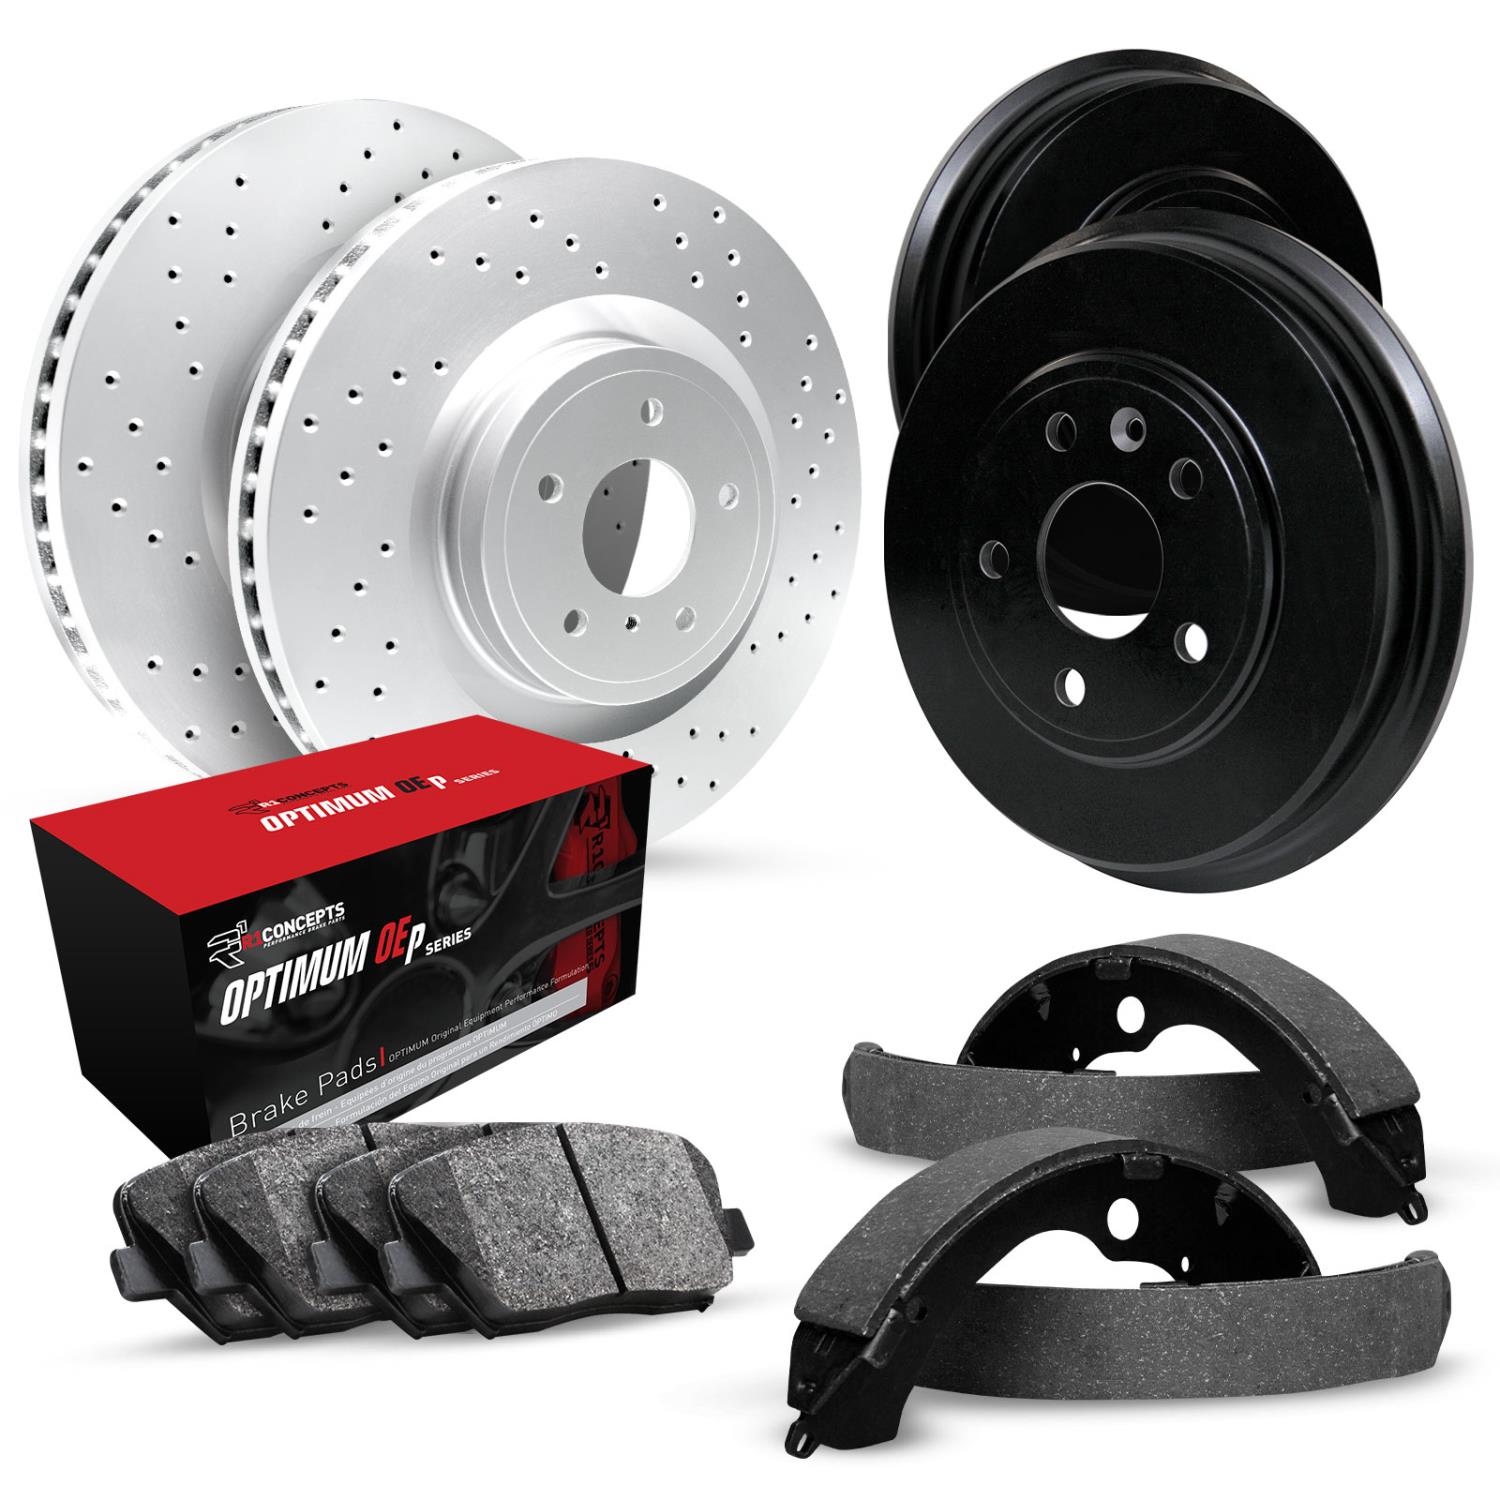 GEO-Carbon Drilled Brake Rotor & Drum Set w/Optimum OE Pads & Shoes, 2003-2005 GM, Position: Front & Rear